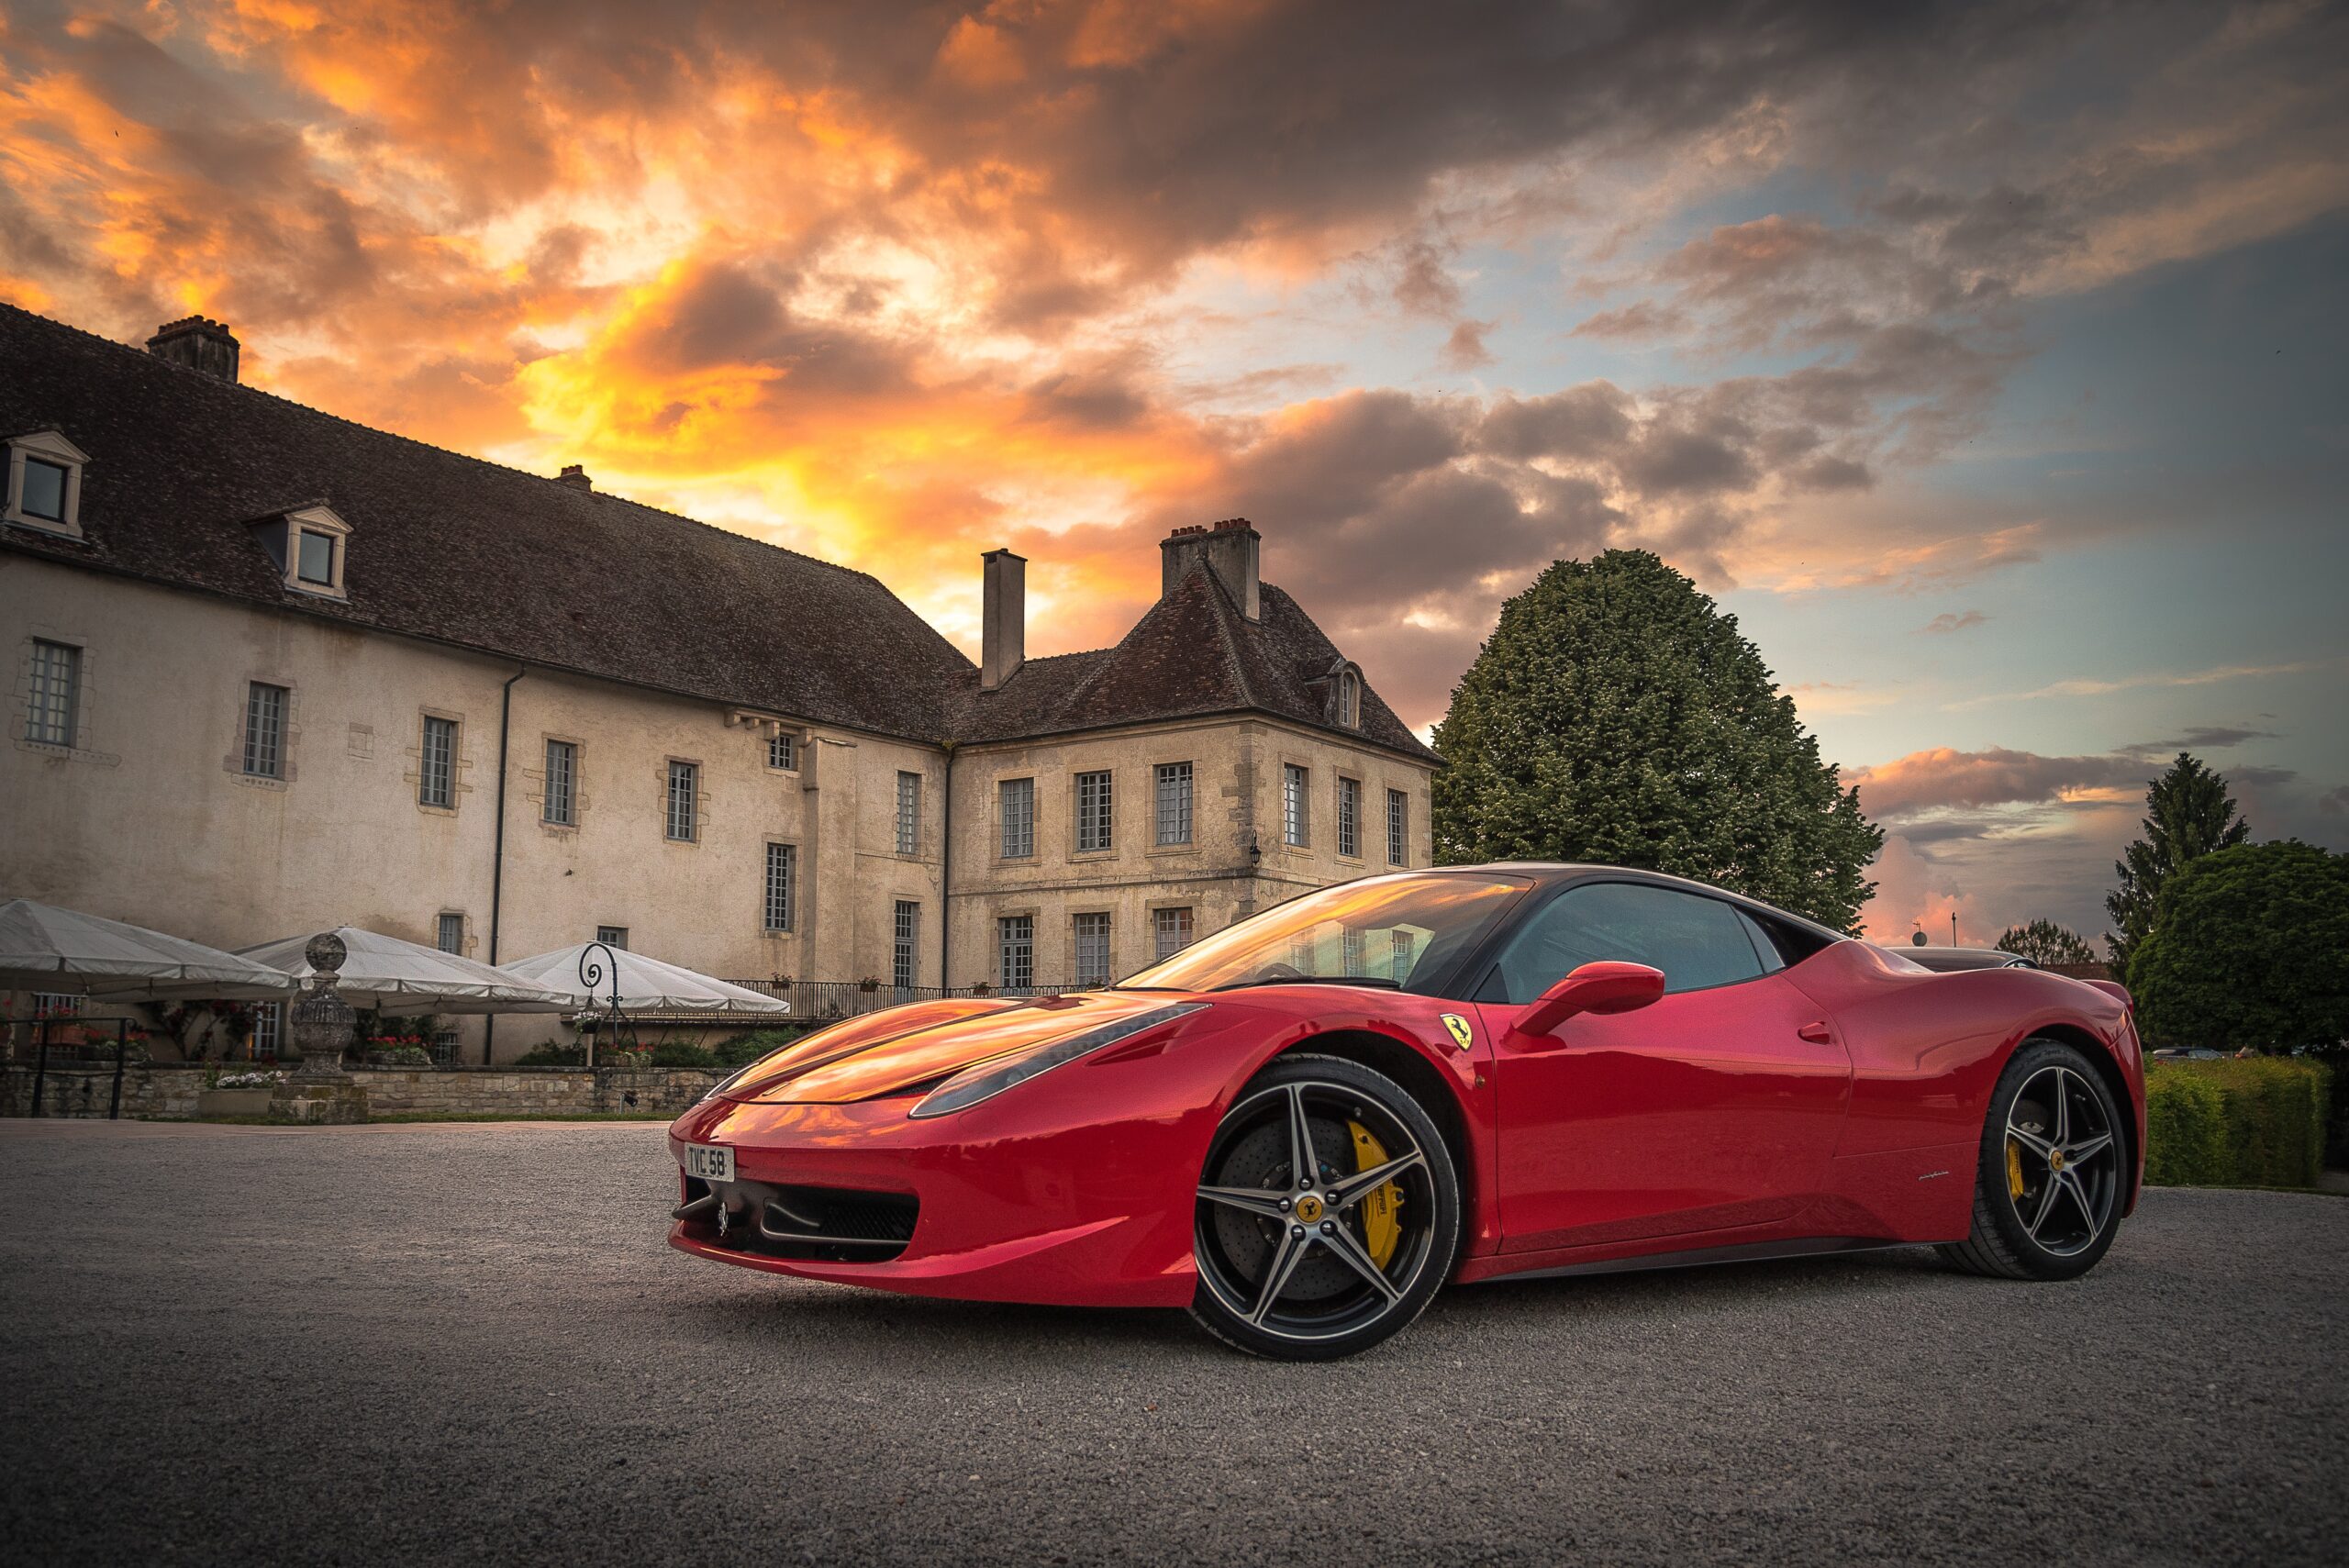 A red Ferrari viewed in profile sits on gravel in front of a sprawling European manor, below a cloudy sky with rays of sunset.